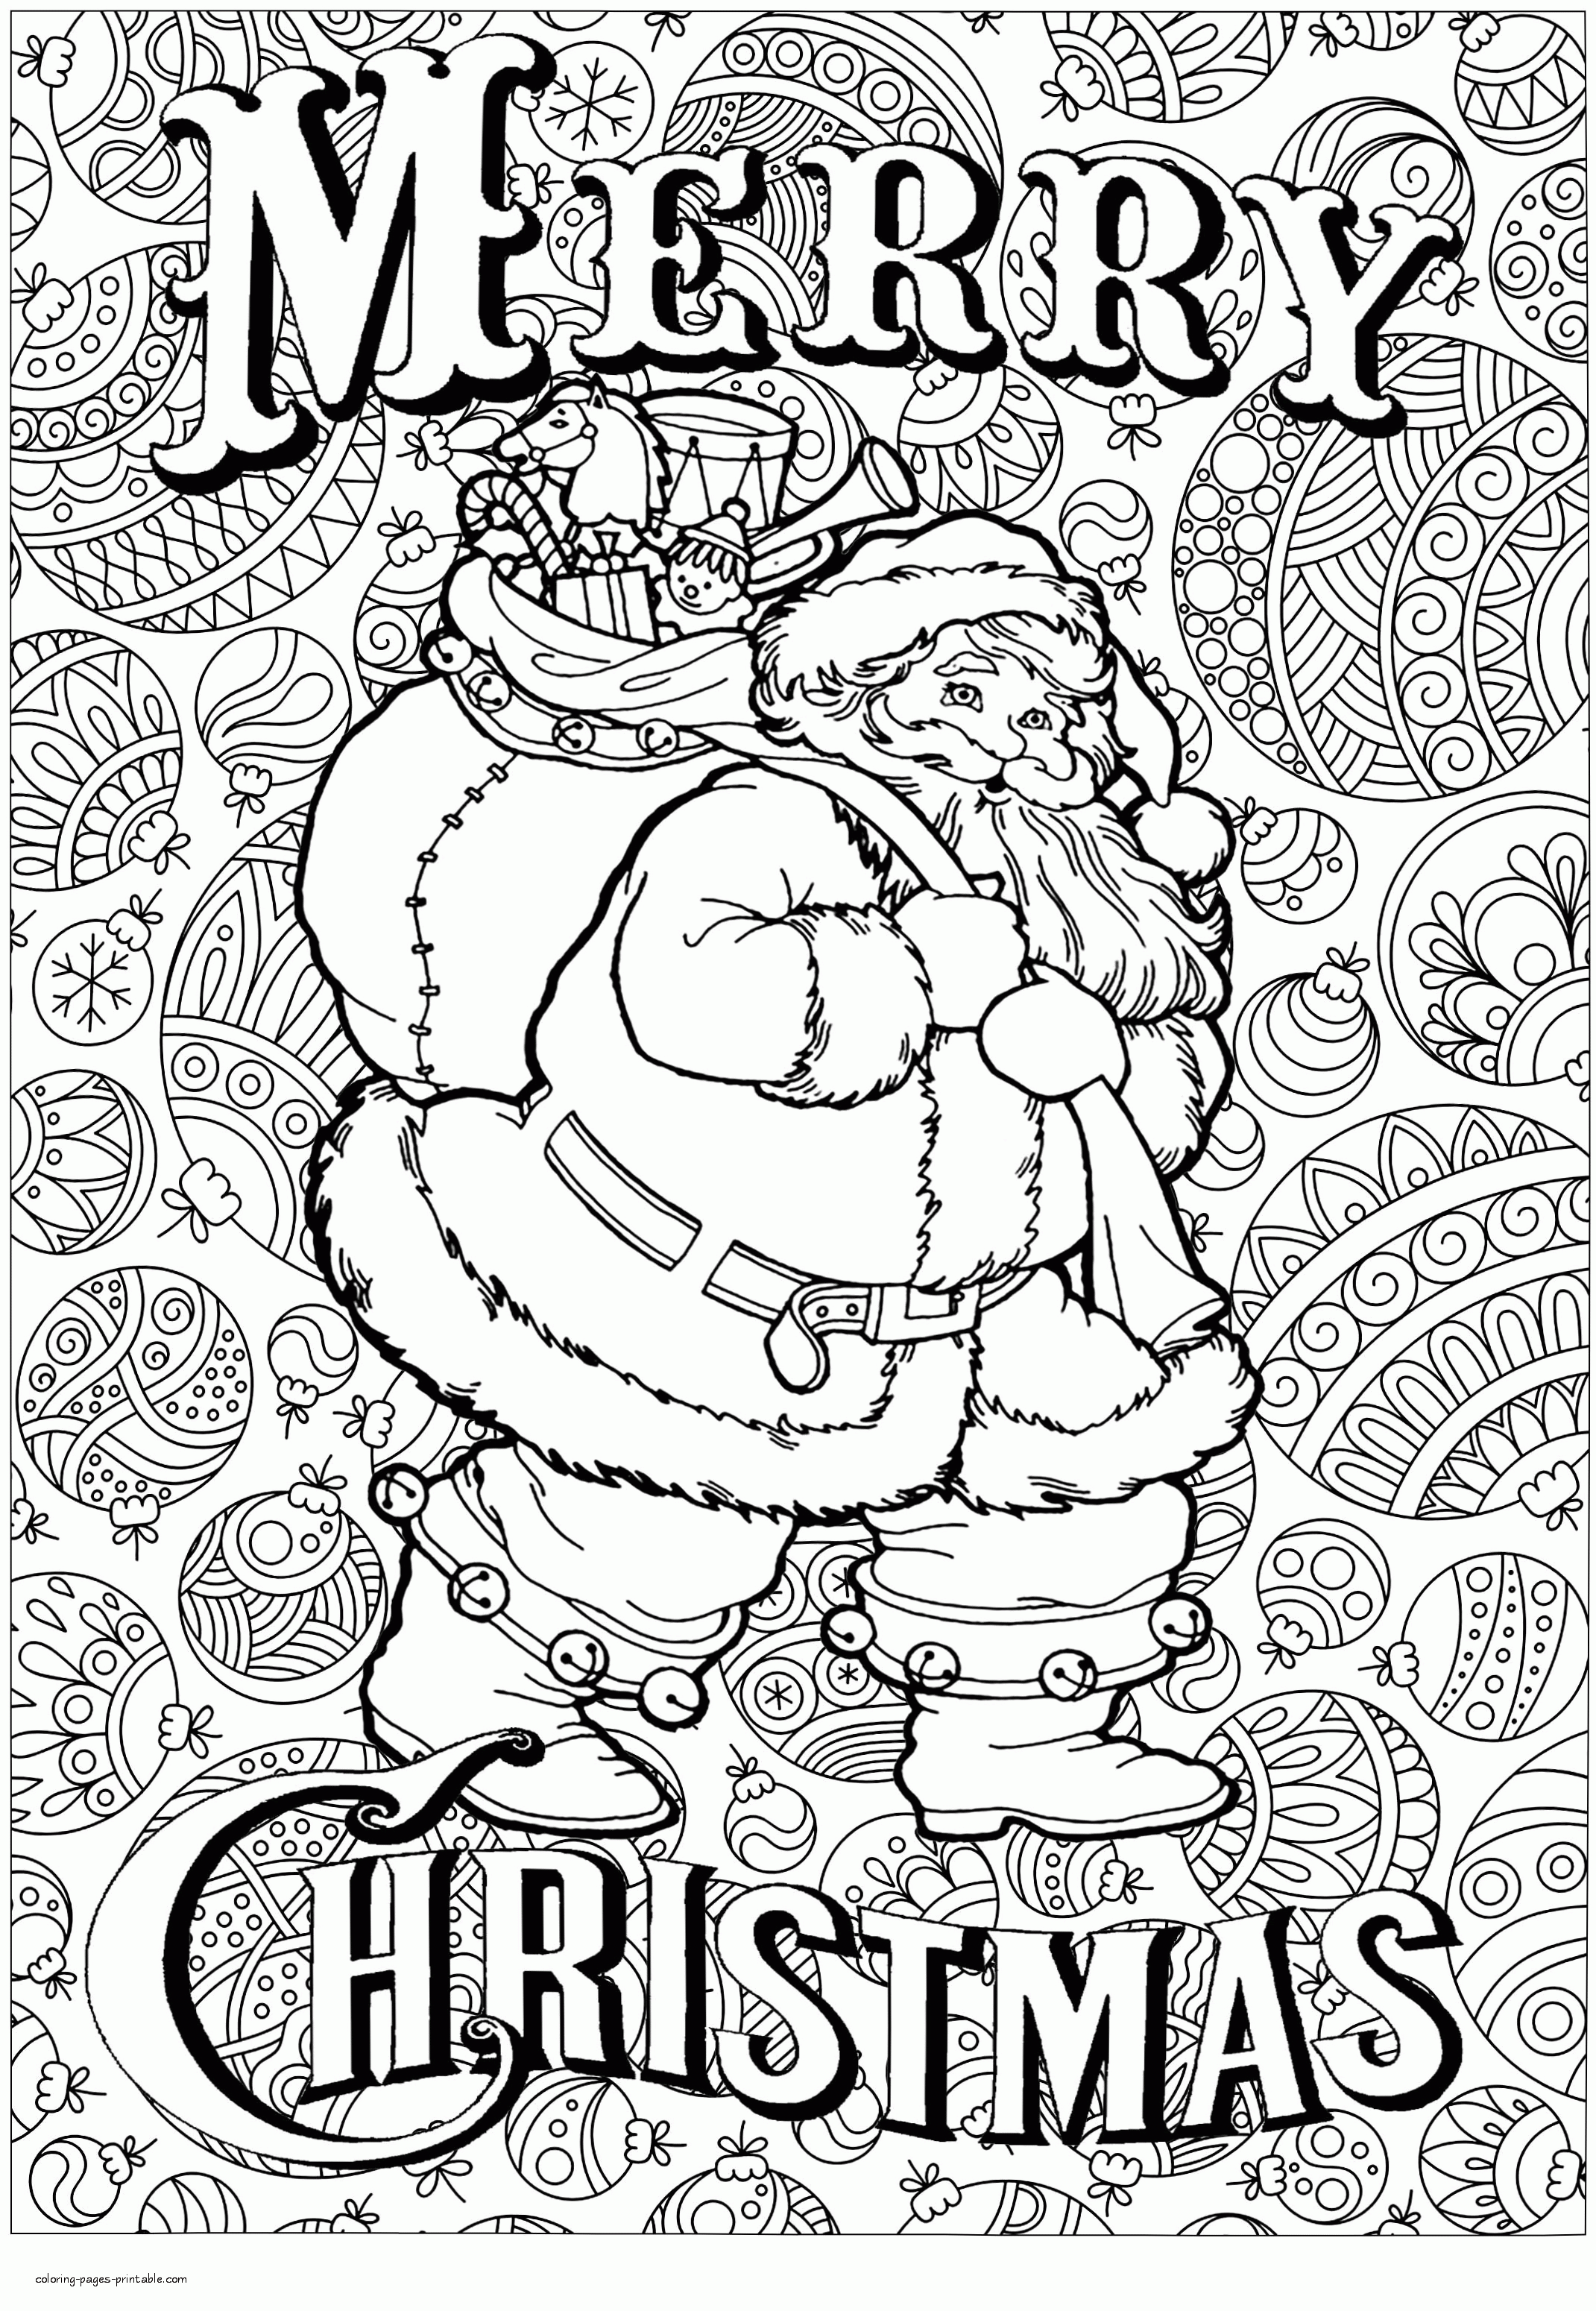 merry-christmas-coloring-pages-for-adults-coloring-pages-printable-com